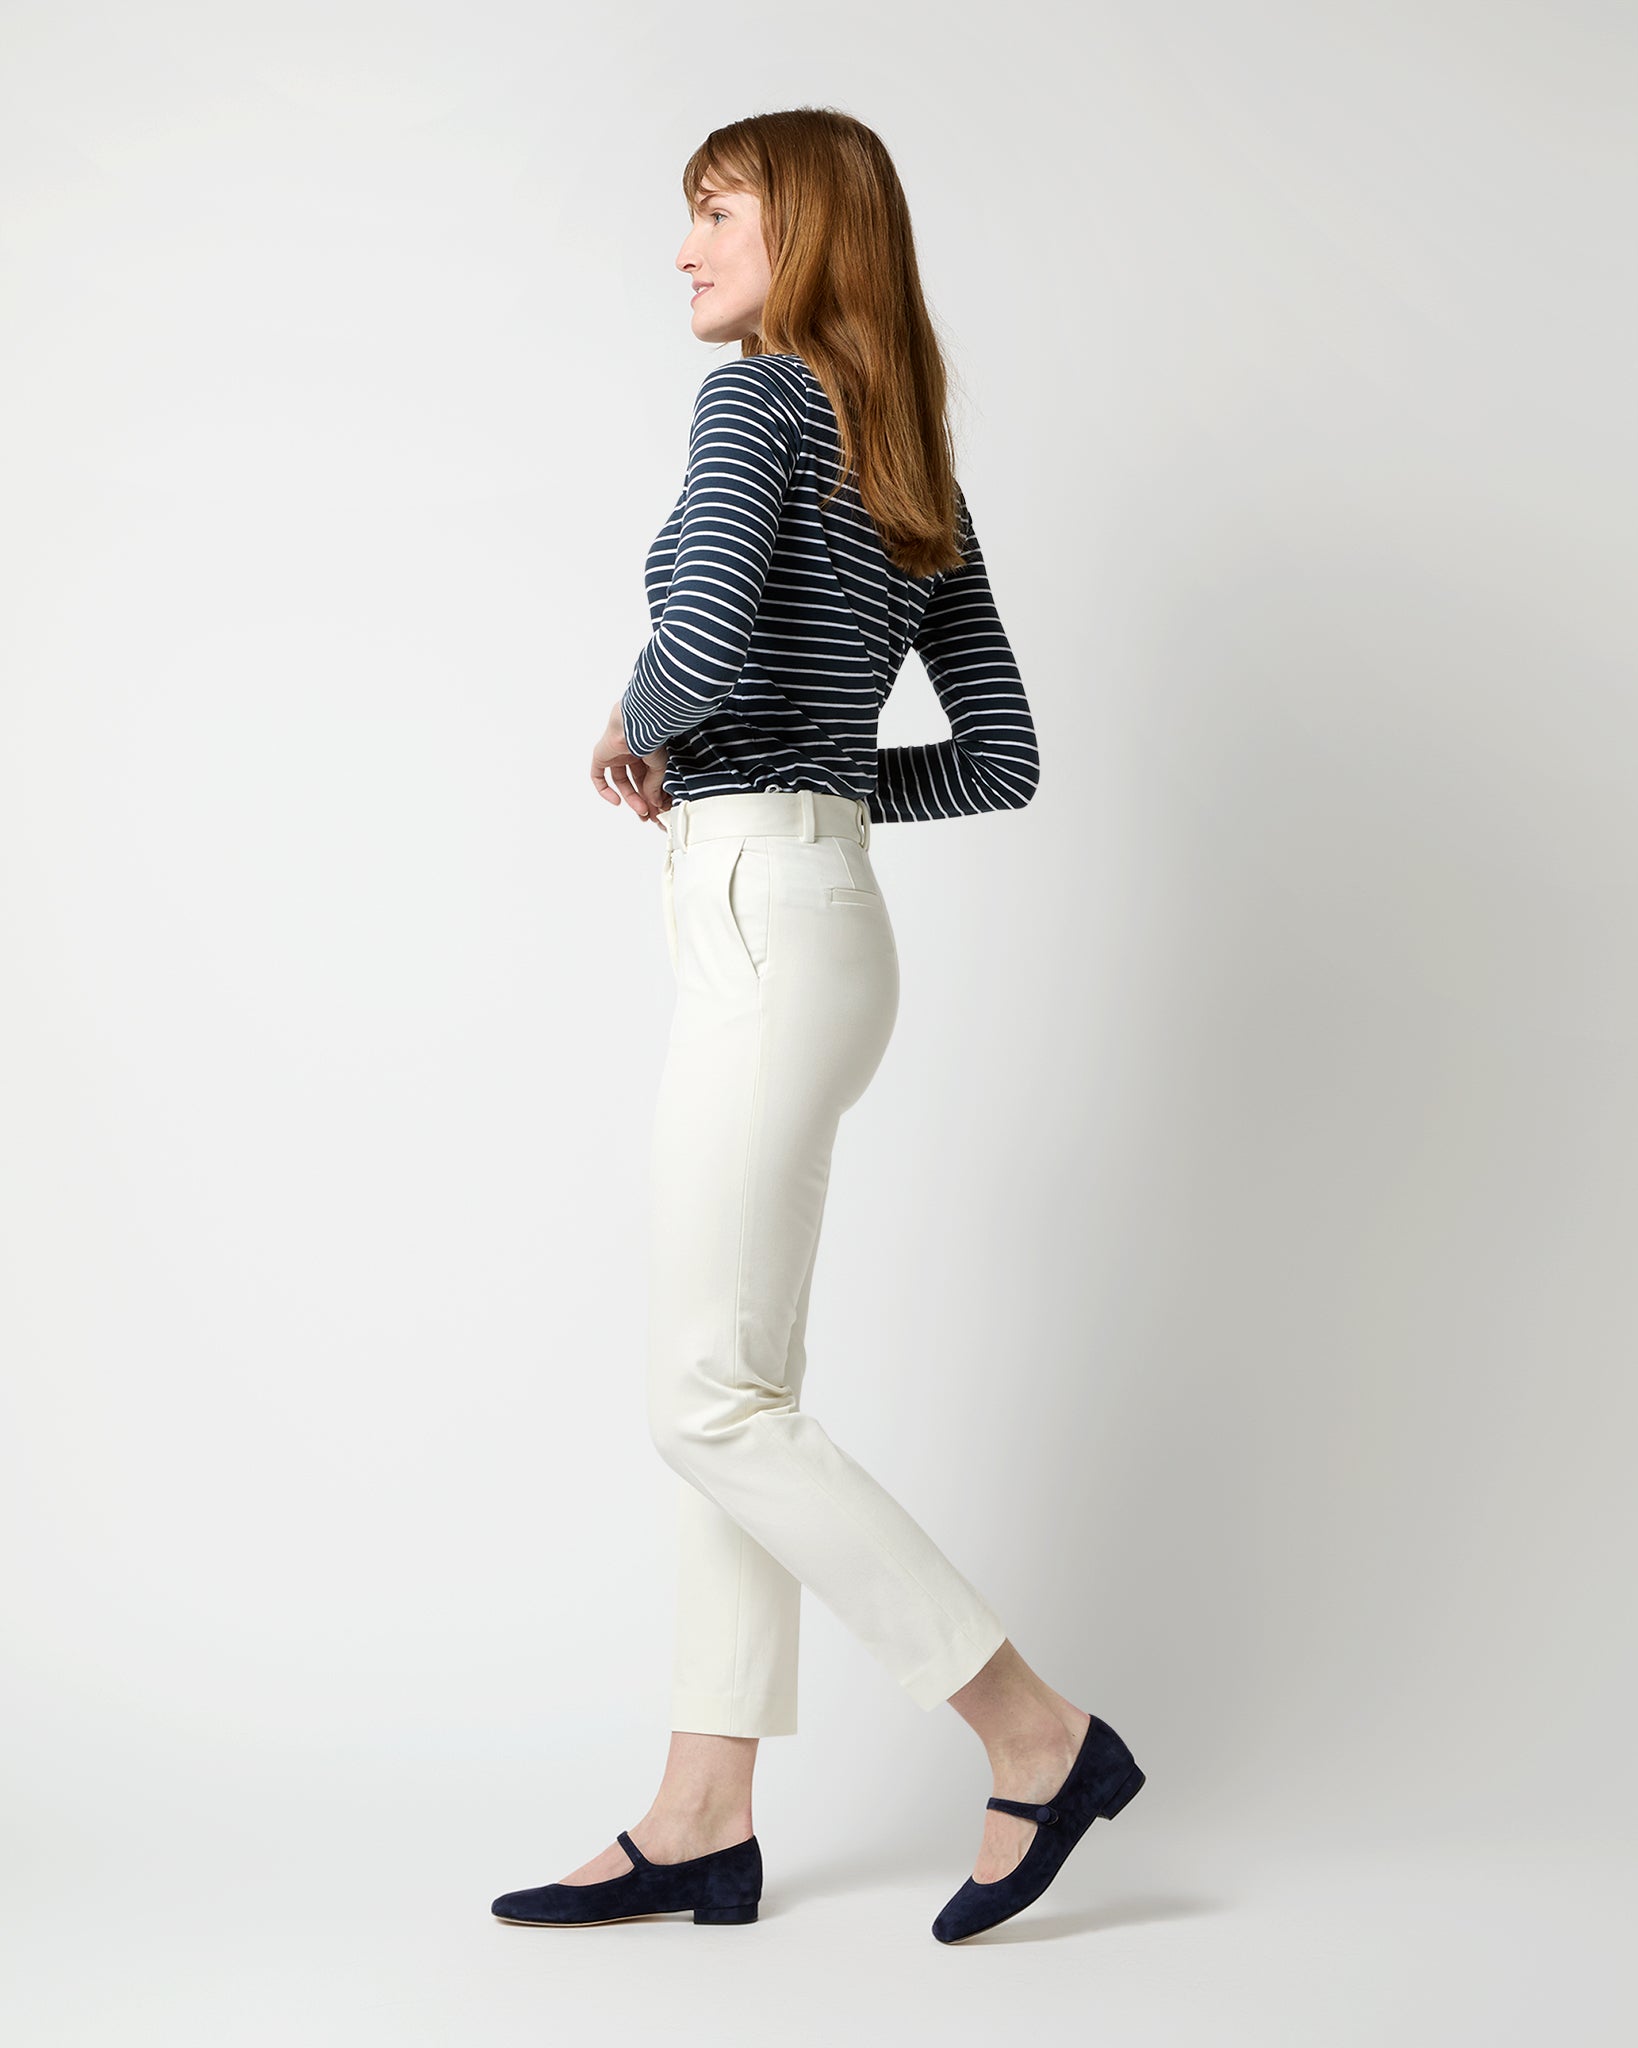 Coleman Pant in Oyster White